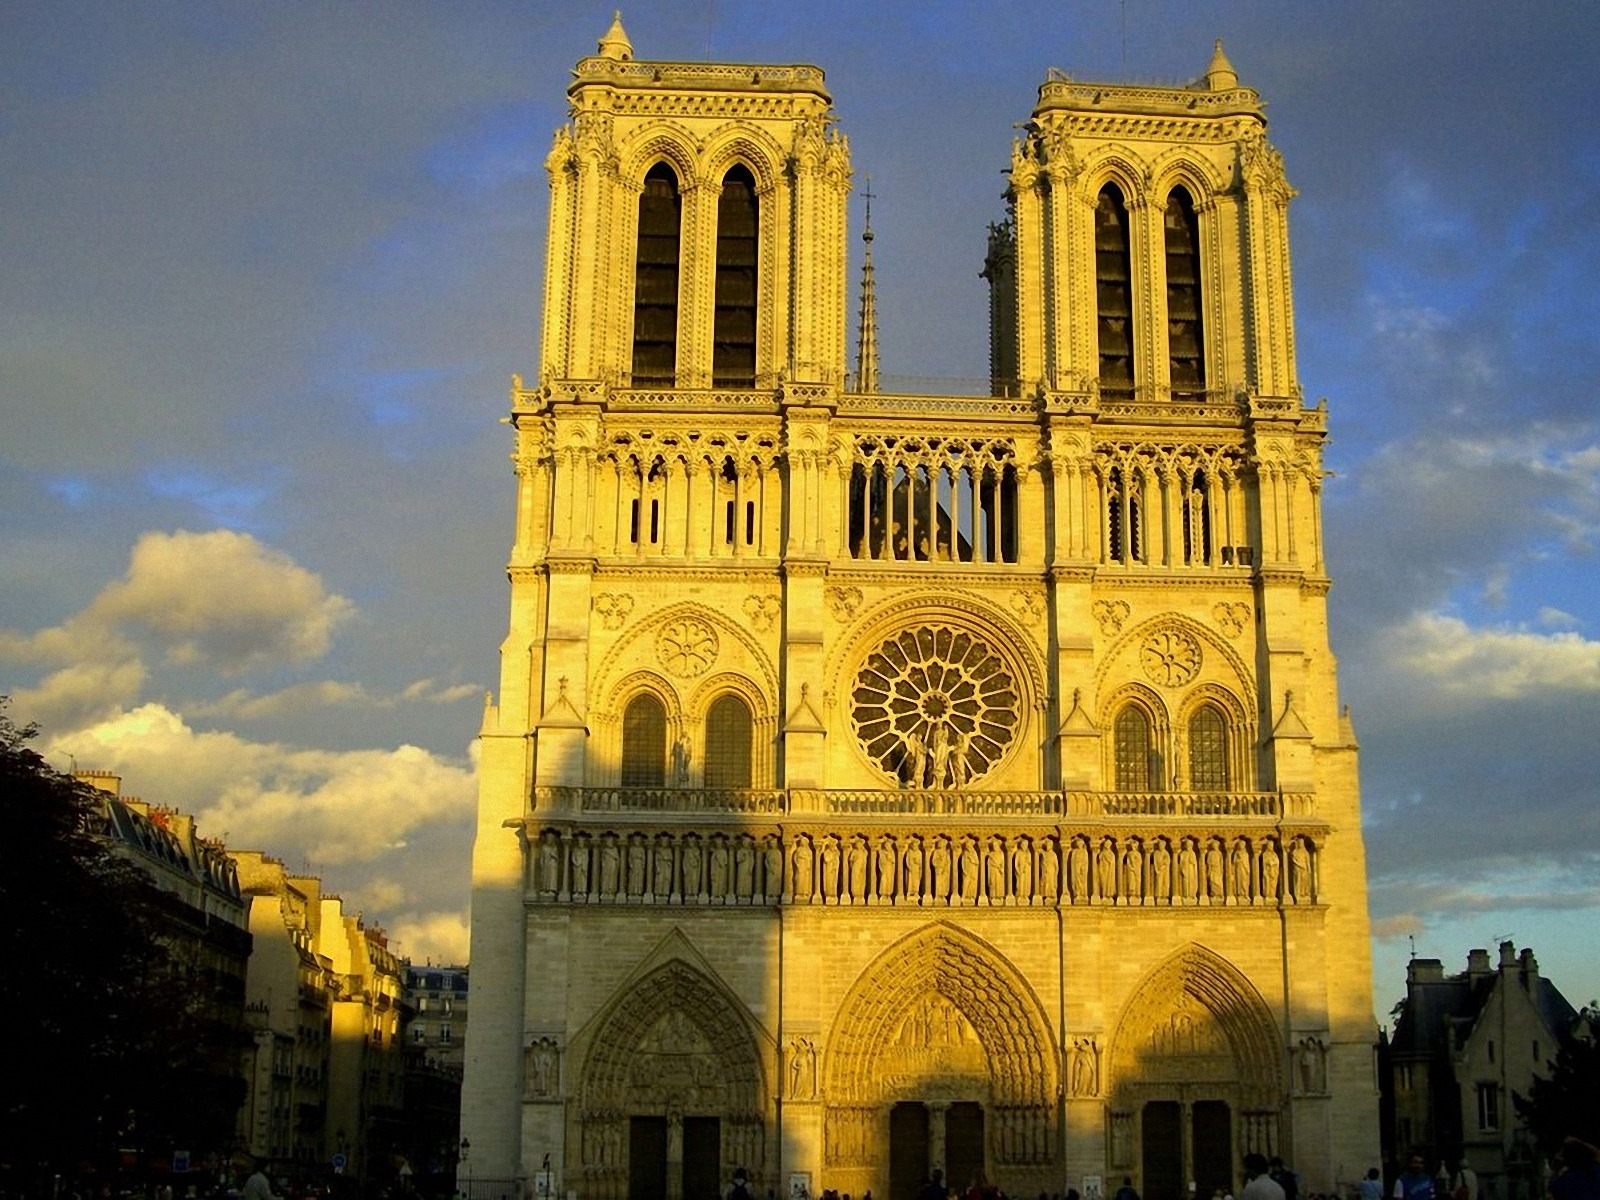 [49+] Notre Dame Wallpaper for Android on WallpaperSafari